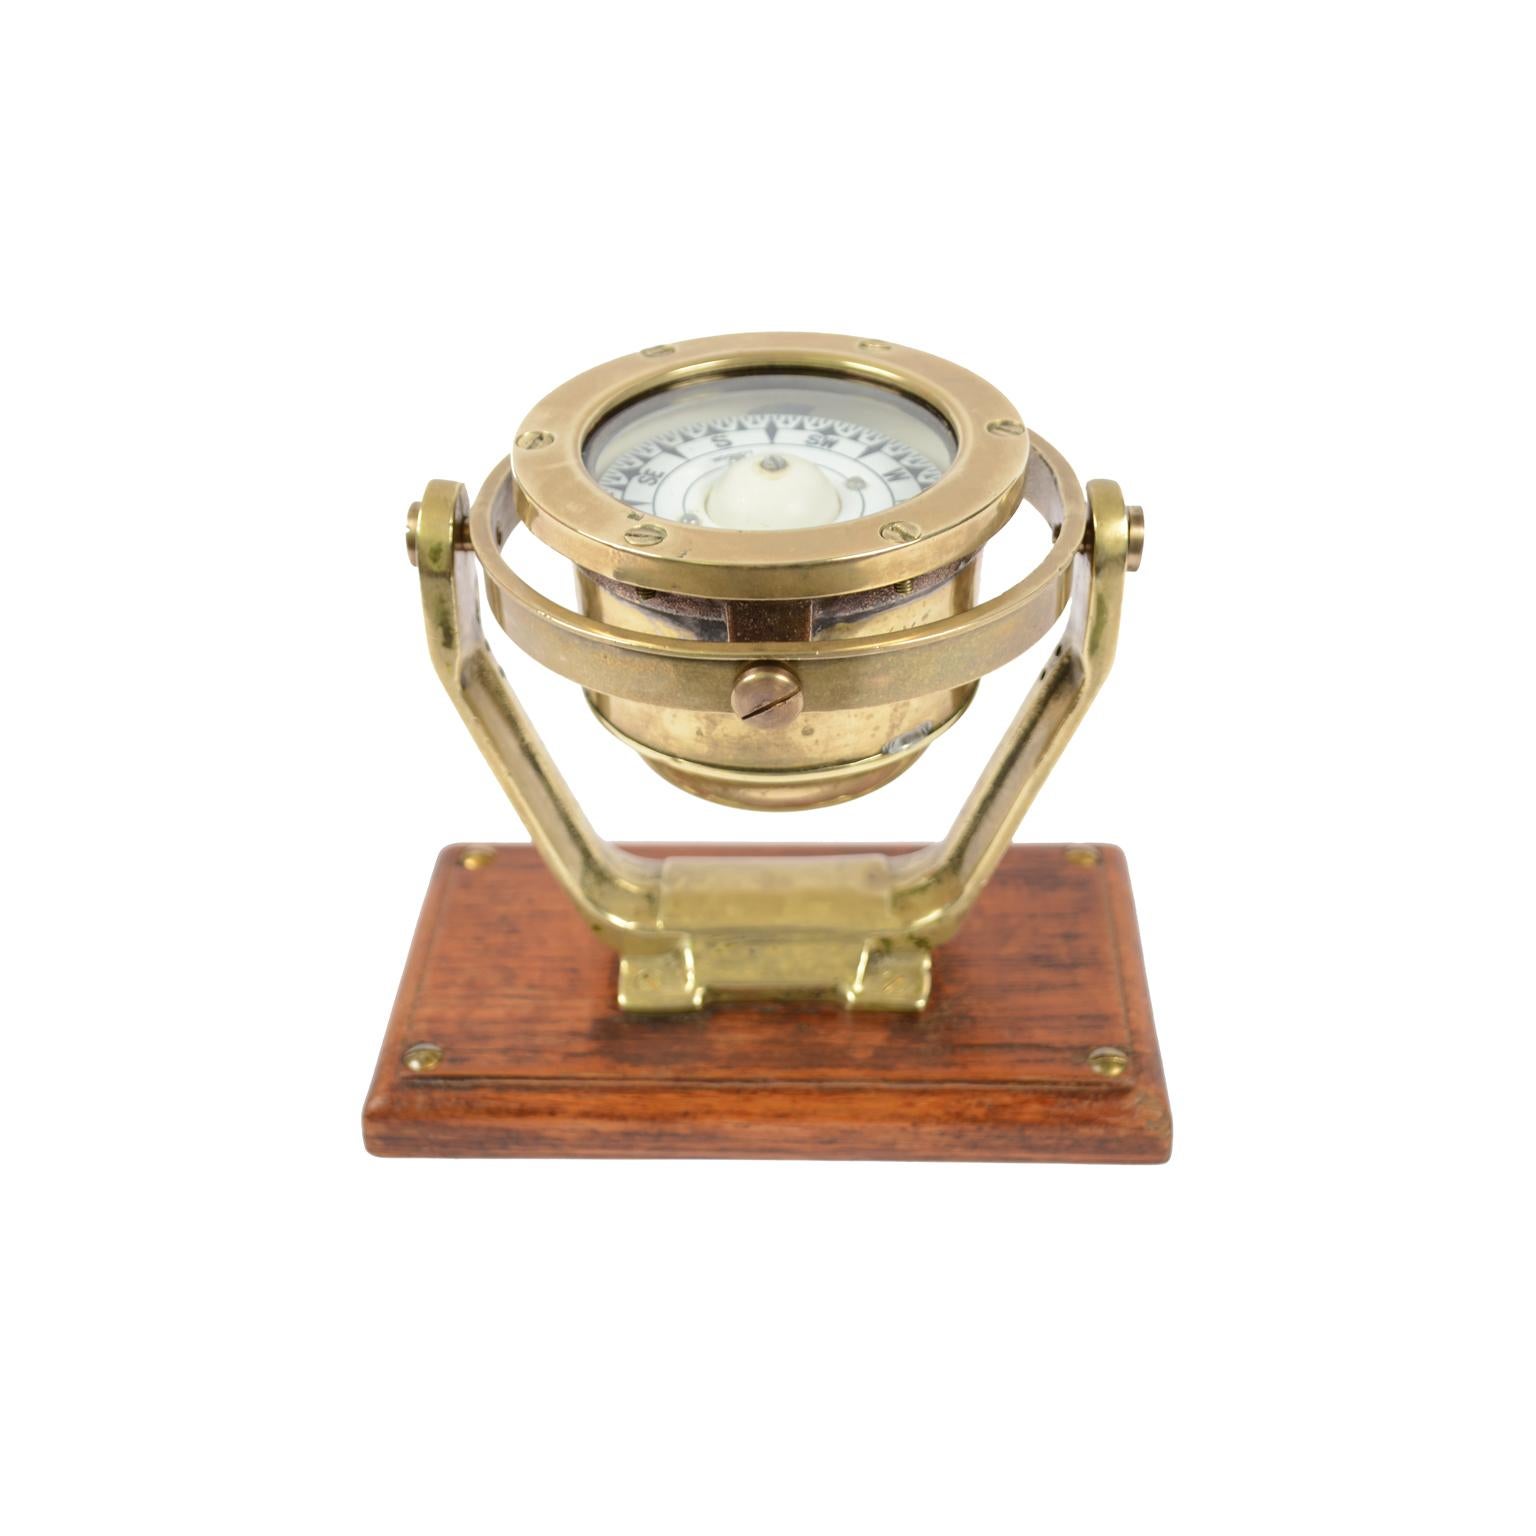 Brass and glass nautical compass on universal joint signed Coubro & Scrutton Ltd London from the second half of the 19th century and mounted on oak wooden board. The compass consists of a brass and glass vessel on the bottom of which is fixed a